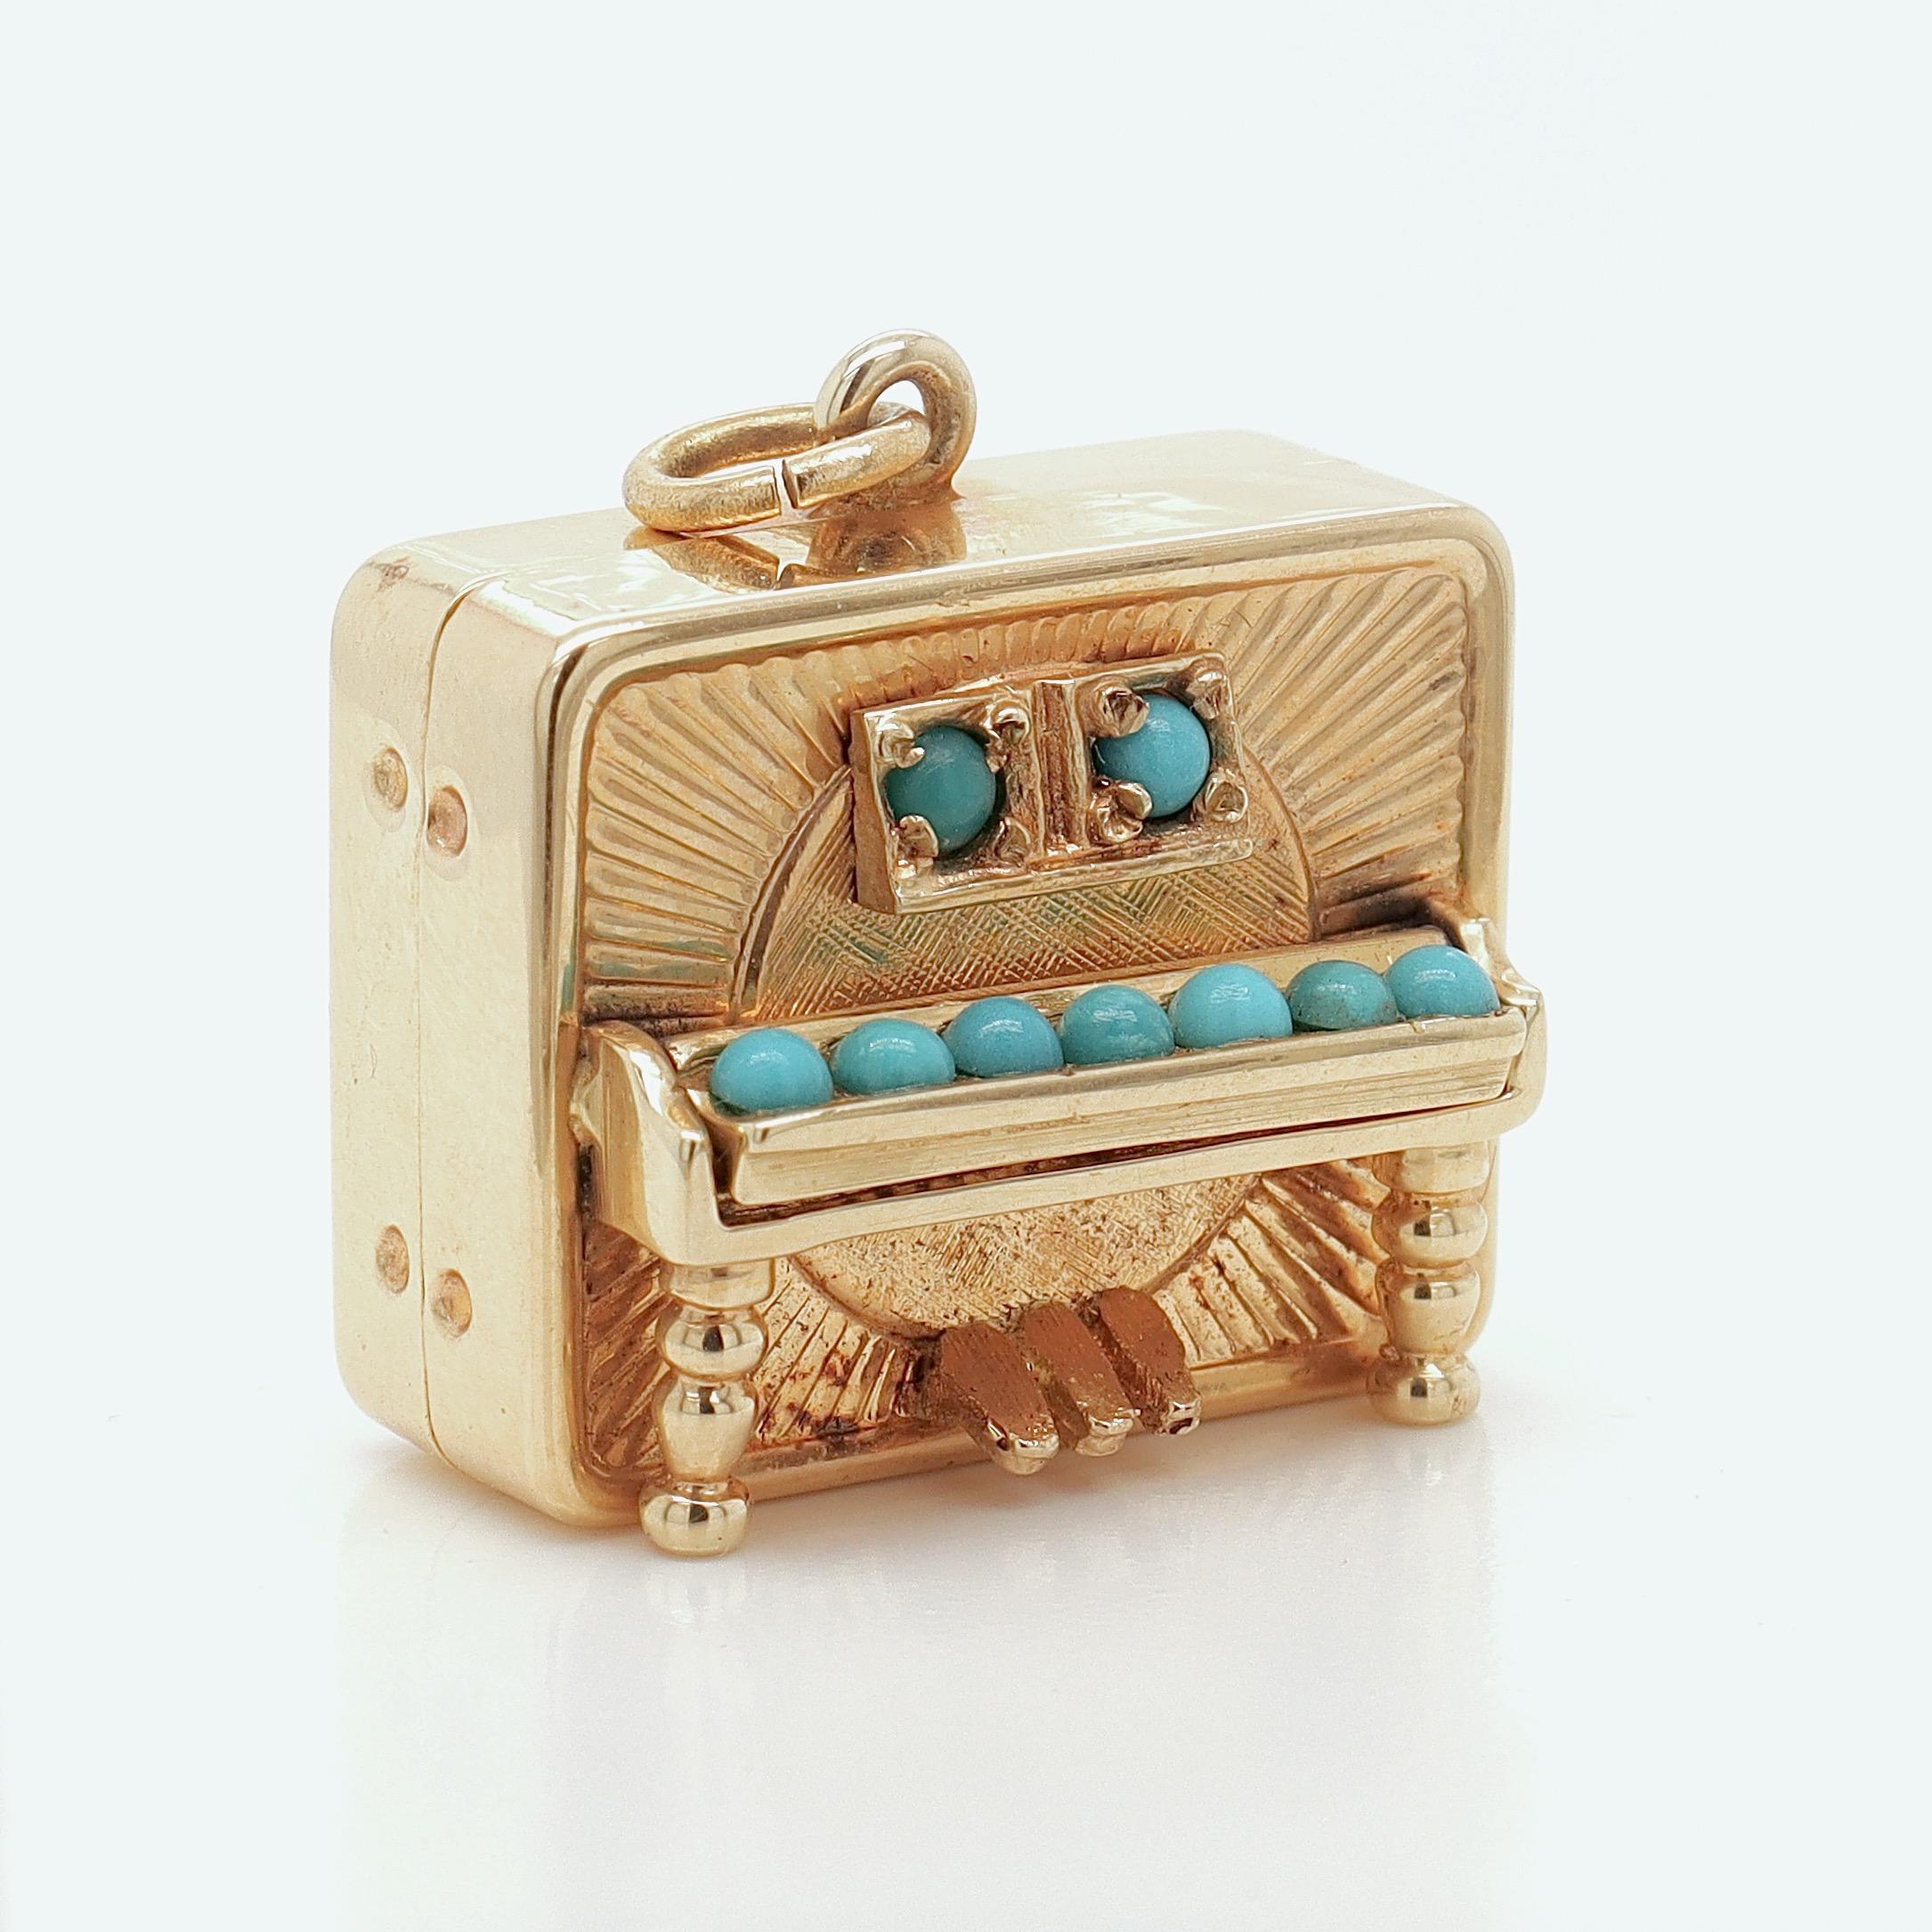 A fine musical charm for a bracelet.

In 14k gold with turquoise cabochons.

In the form of a piano (or player piano).

With an articulating key cover and a fixed bail to the top.

Likely made by Walter Lampl for Marchal Jewelers.

Together with its